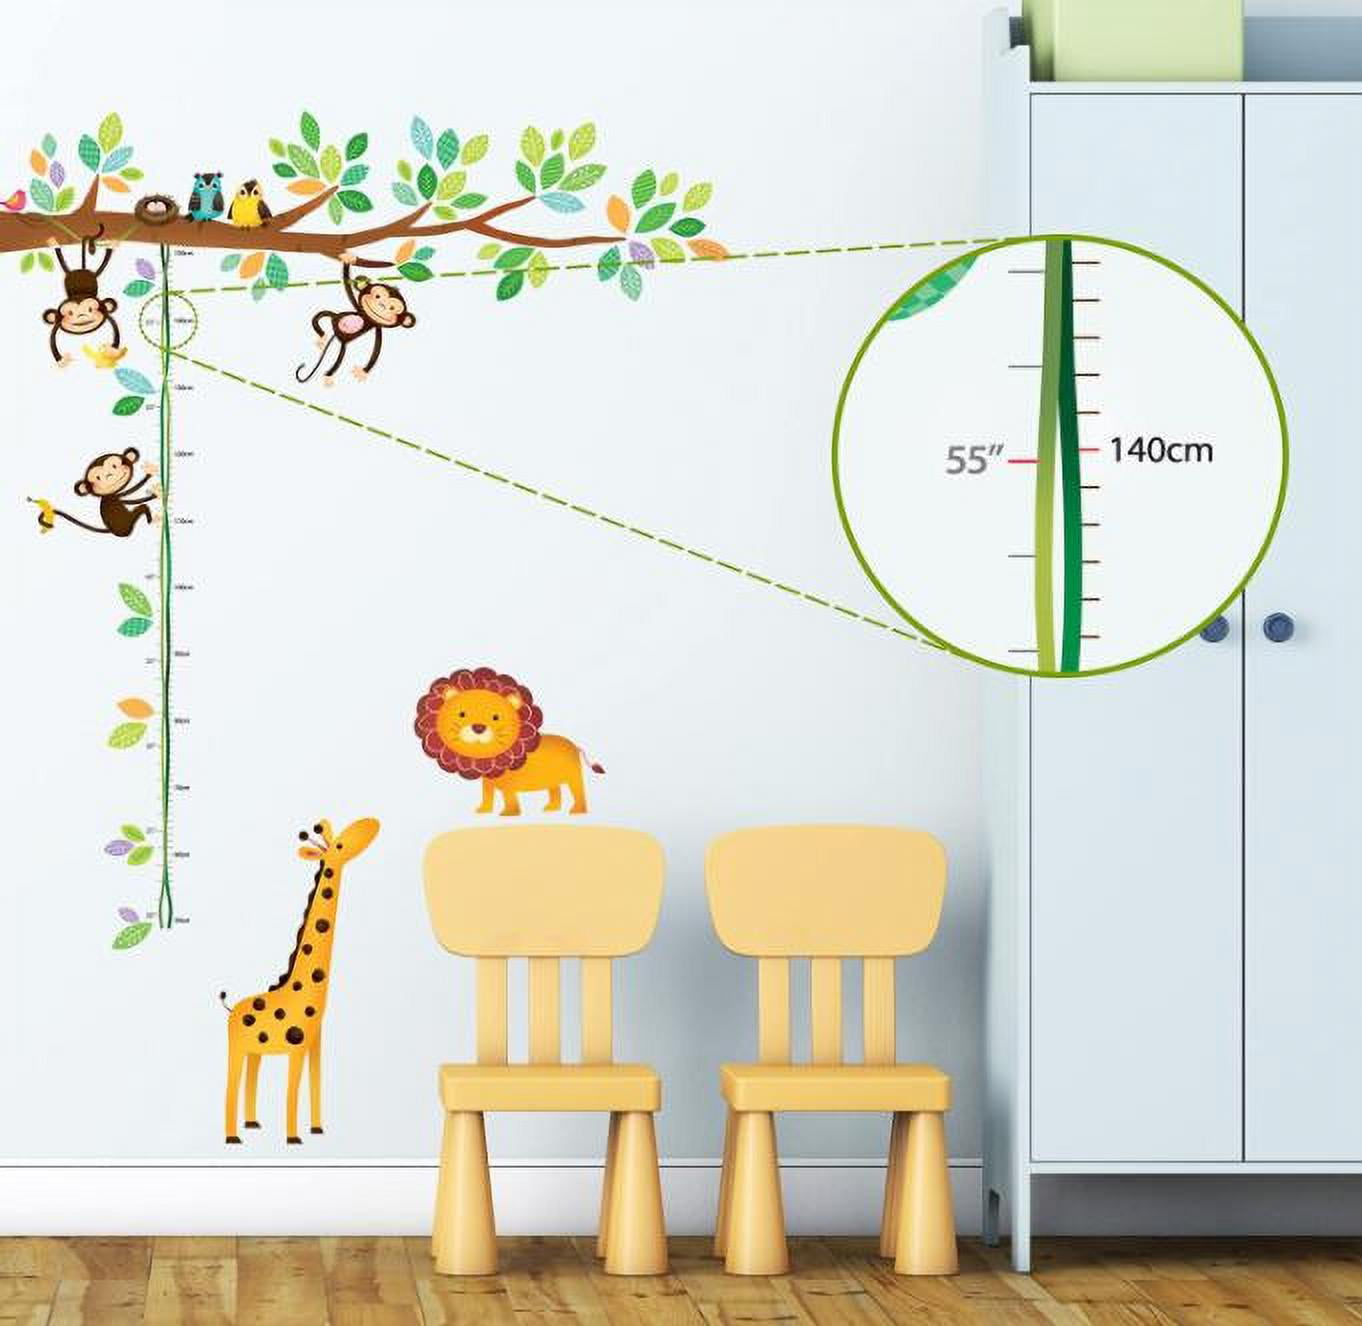 Height Chart Free Postage 40 Stickers Included Jungle Design 